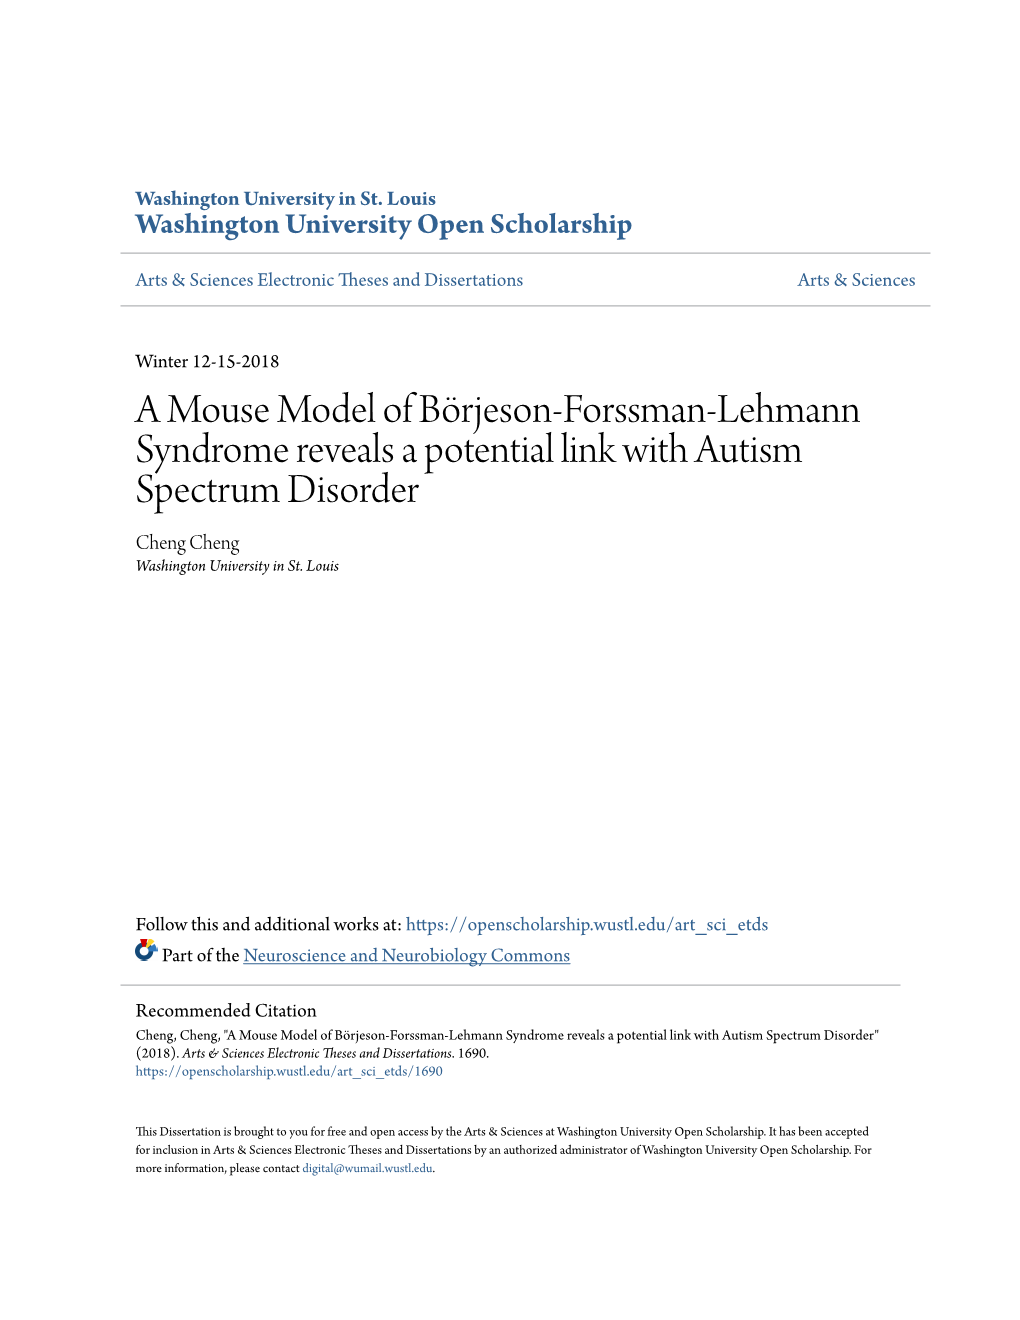 A Mouse Model of Börjeson-Forssman-Lehmann Syndrome Reveals a Potential Link with Autism Spectrum Disorder Cheng Cheng Washington University in St